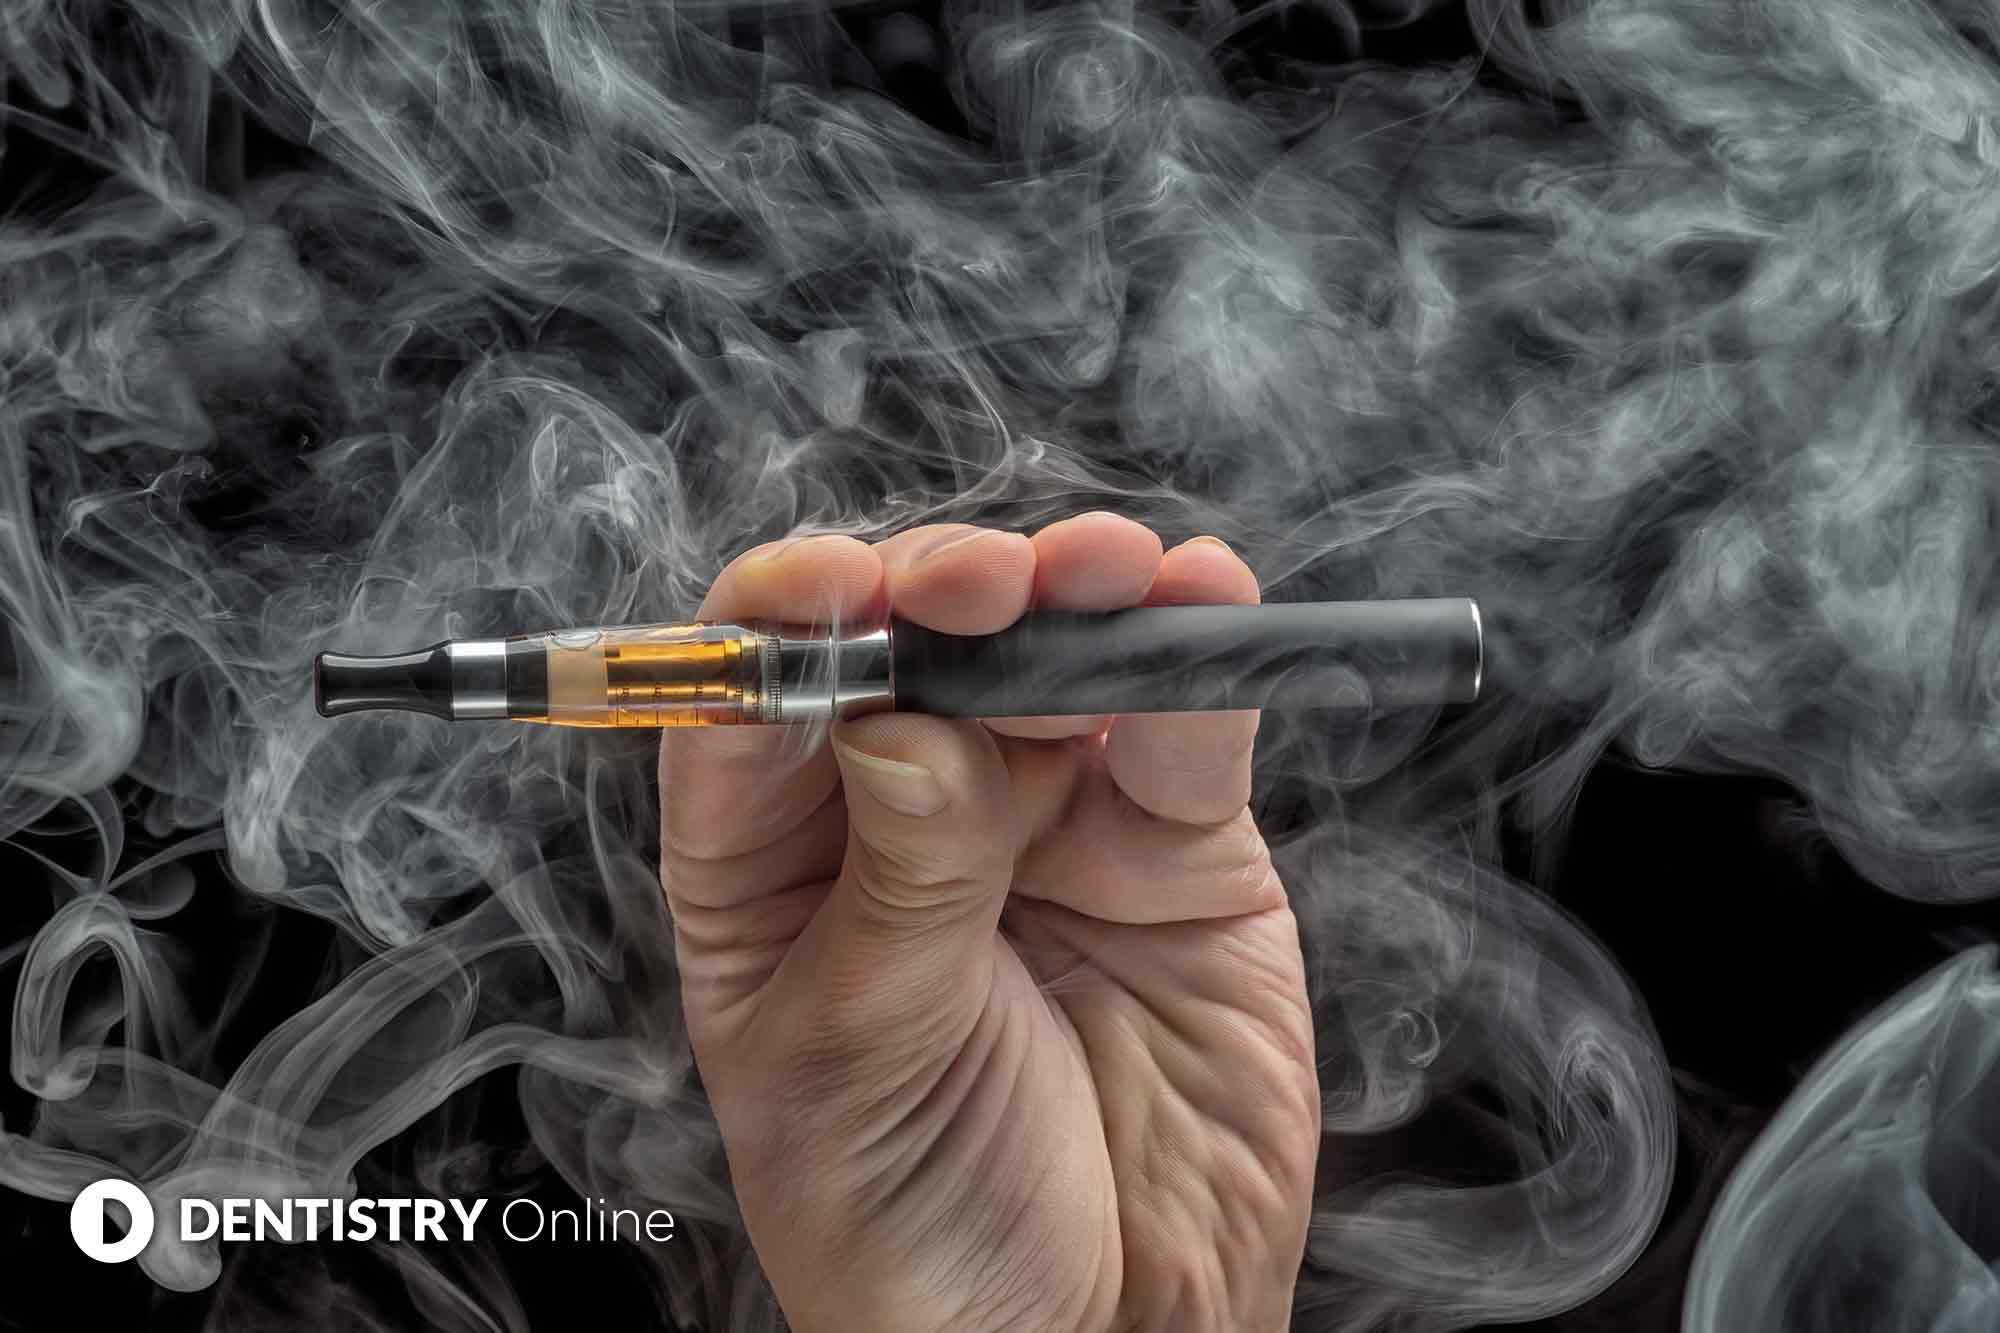 An e-cigarette is 70% more effective in helping smokers ditch their habit than nicotine replacement therapy, new research reveals